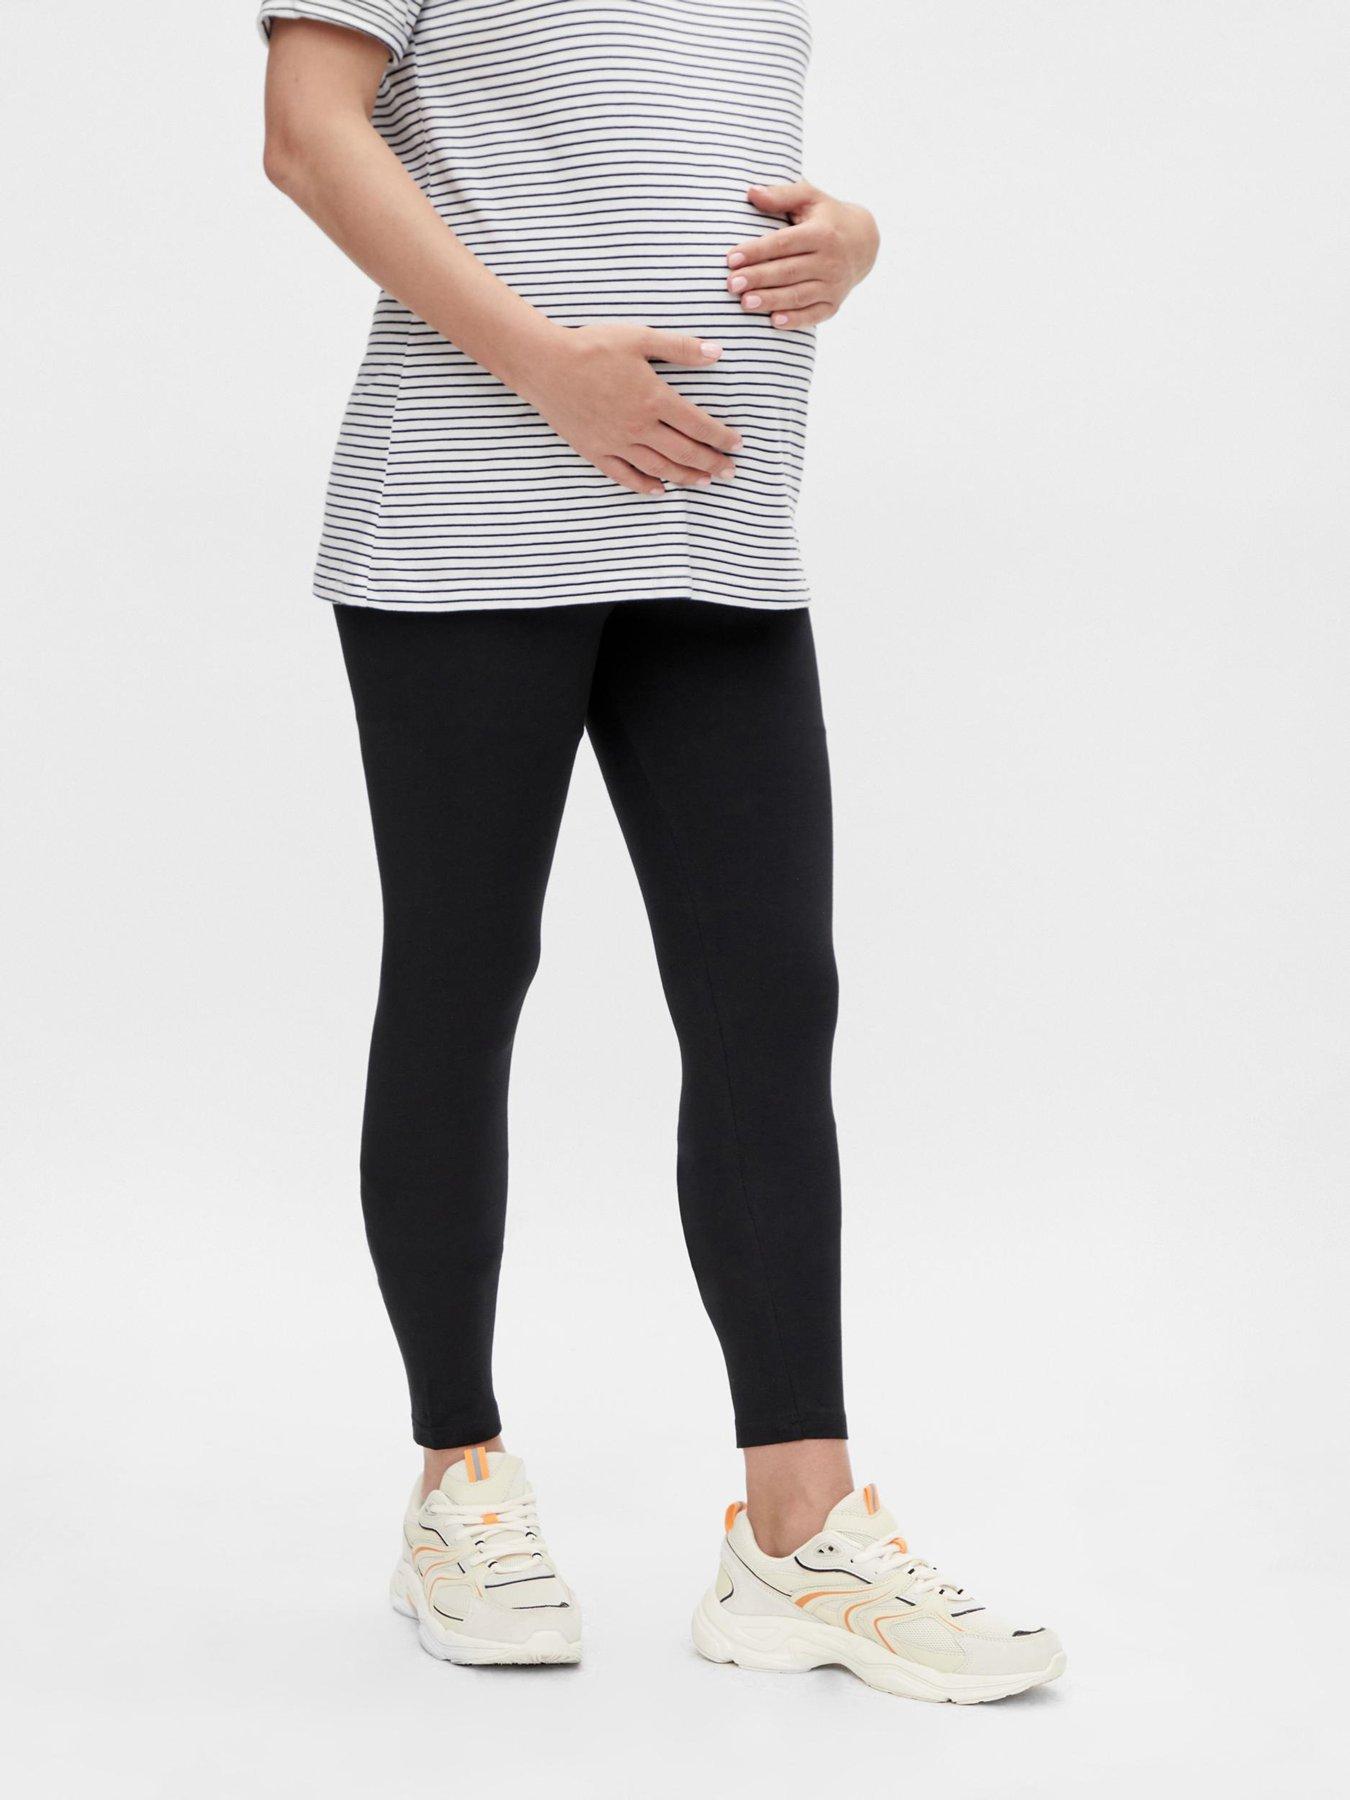 3 Comfy Outfits to Lounge In At Home + Cozy Gifts Roundup + Extra 20% Off  Sale Items at Nordstrom! | Comfy outfits, Maternity work clothes, Maternity  fashion